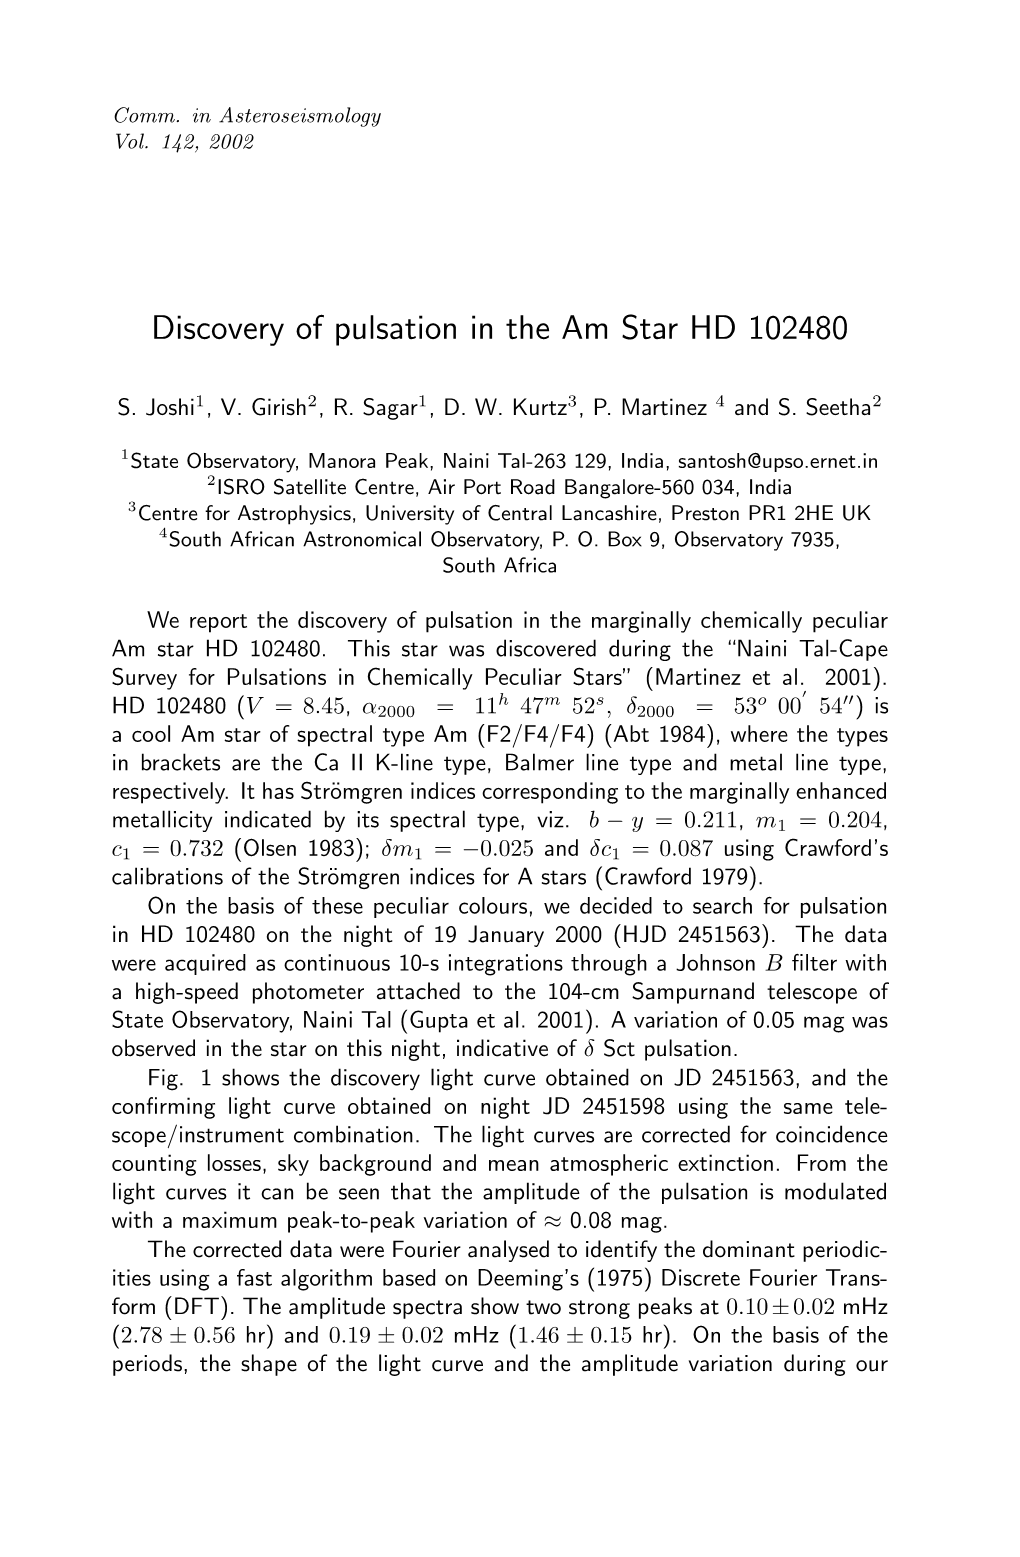 Discovery of Pulsation in the Am Star HD 102480